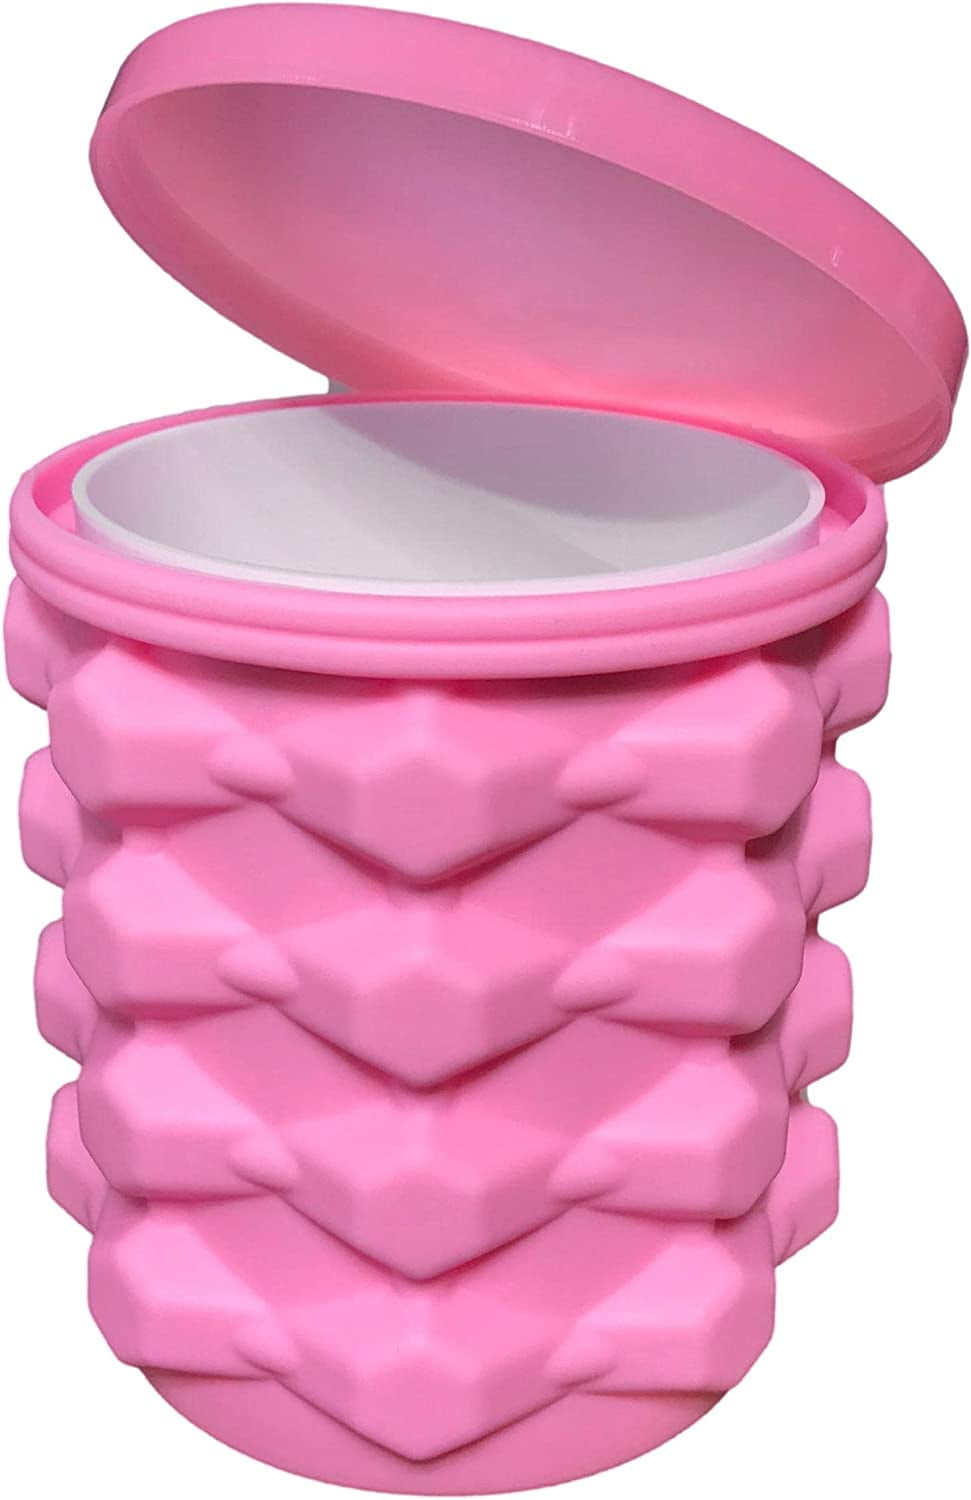 The Ultimate Mini Ice Cube Maker Pink Silicone Bucket Ice Mold and Storage  Bin, Portable 2 in 1 Ice Cube Maker, Small Ice Container Makes Frozen Ice